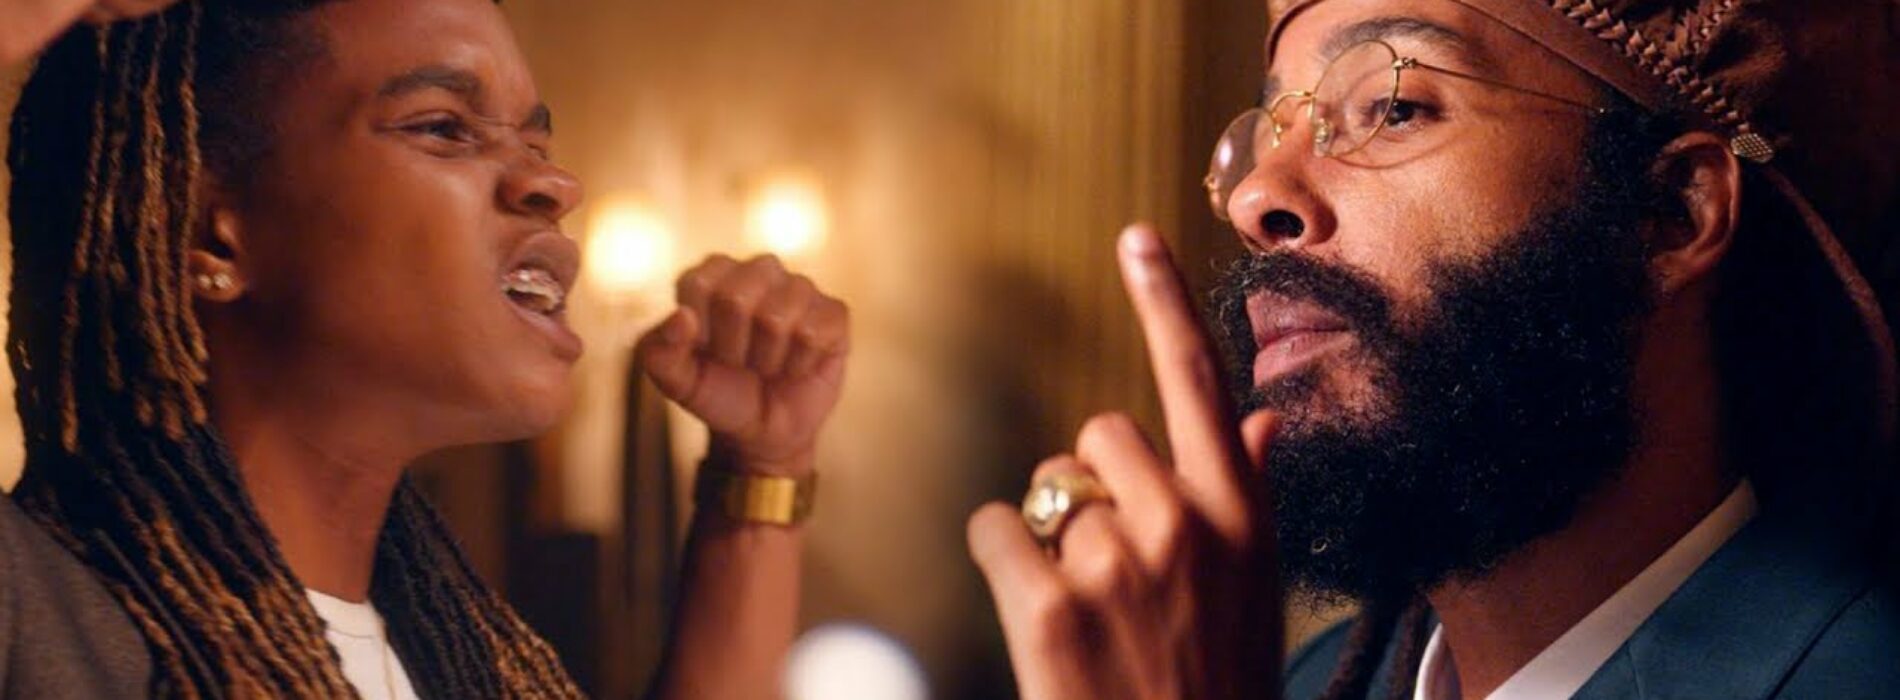 Protoje – Switch It Up (Official Video) ft. Koffee – Janvier 2021